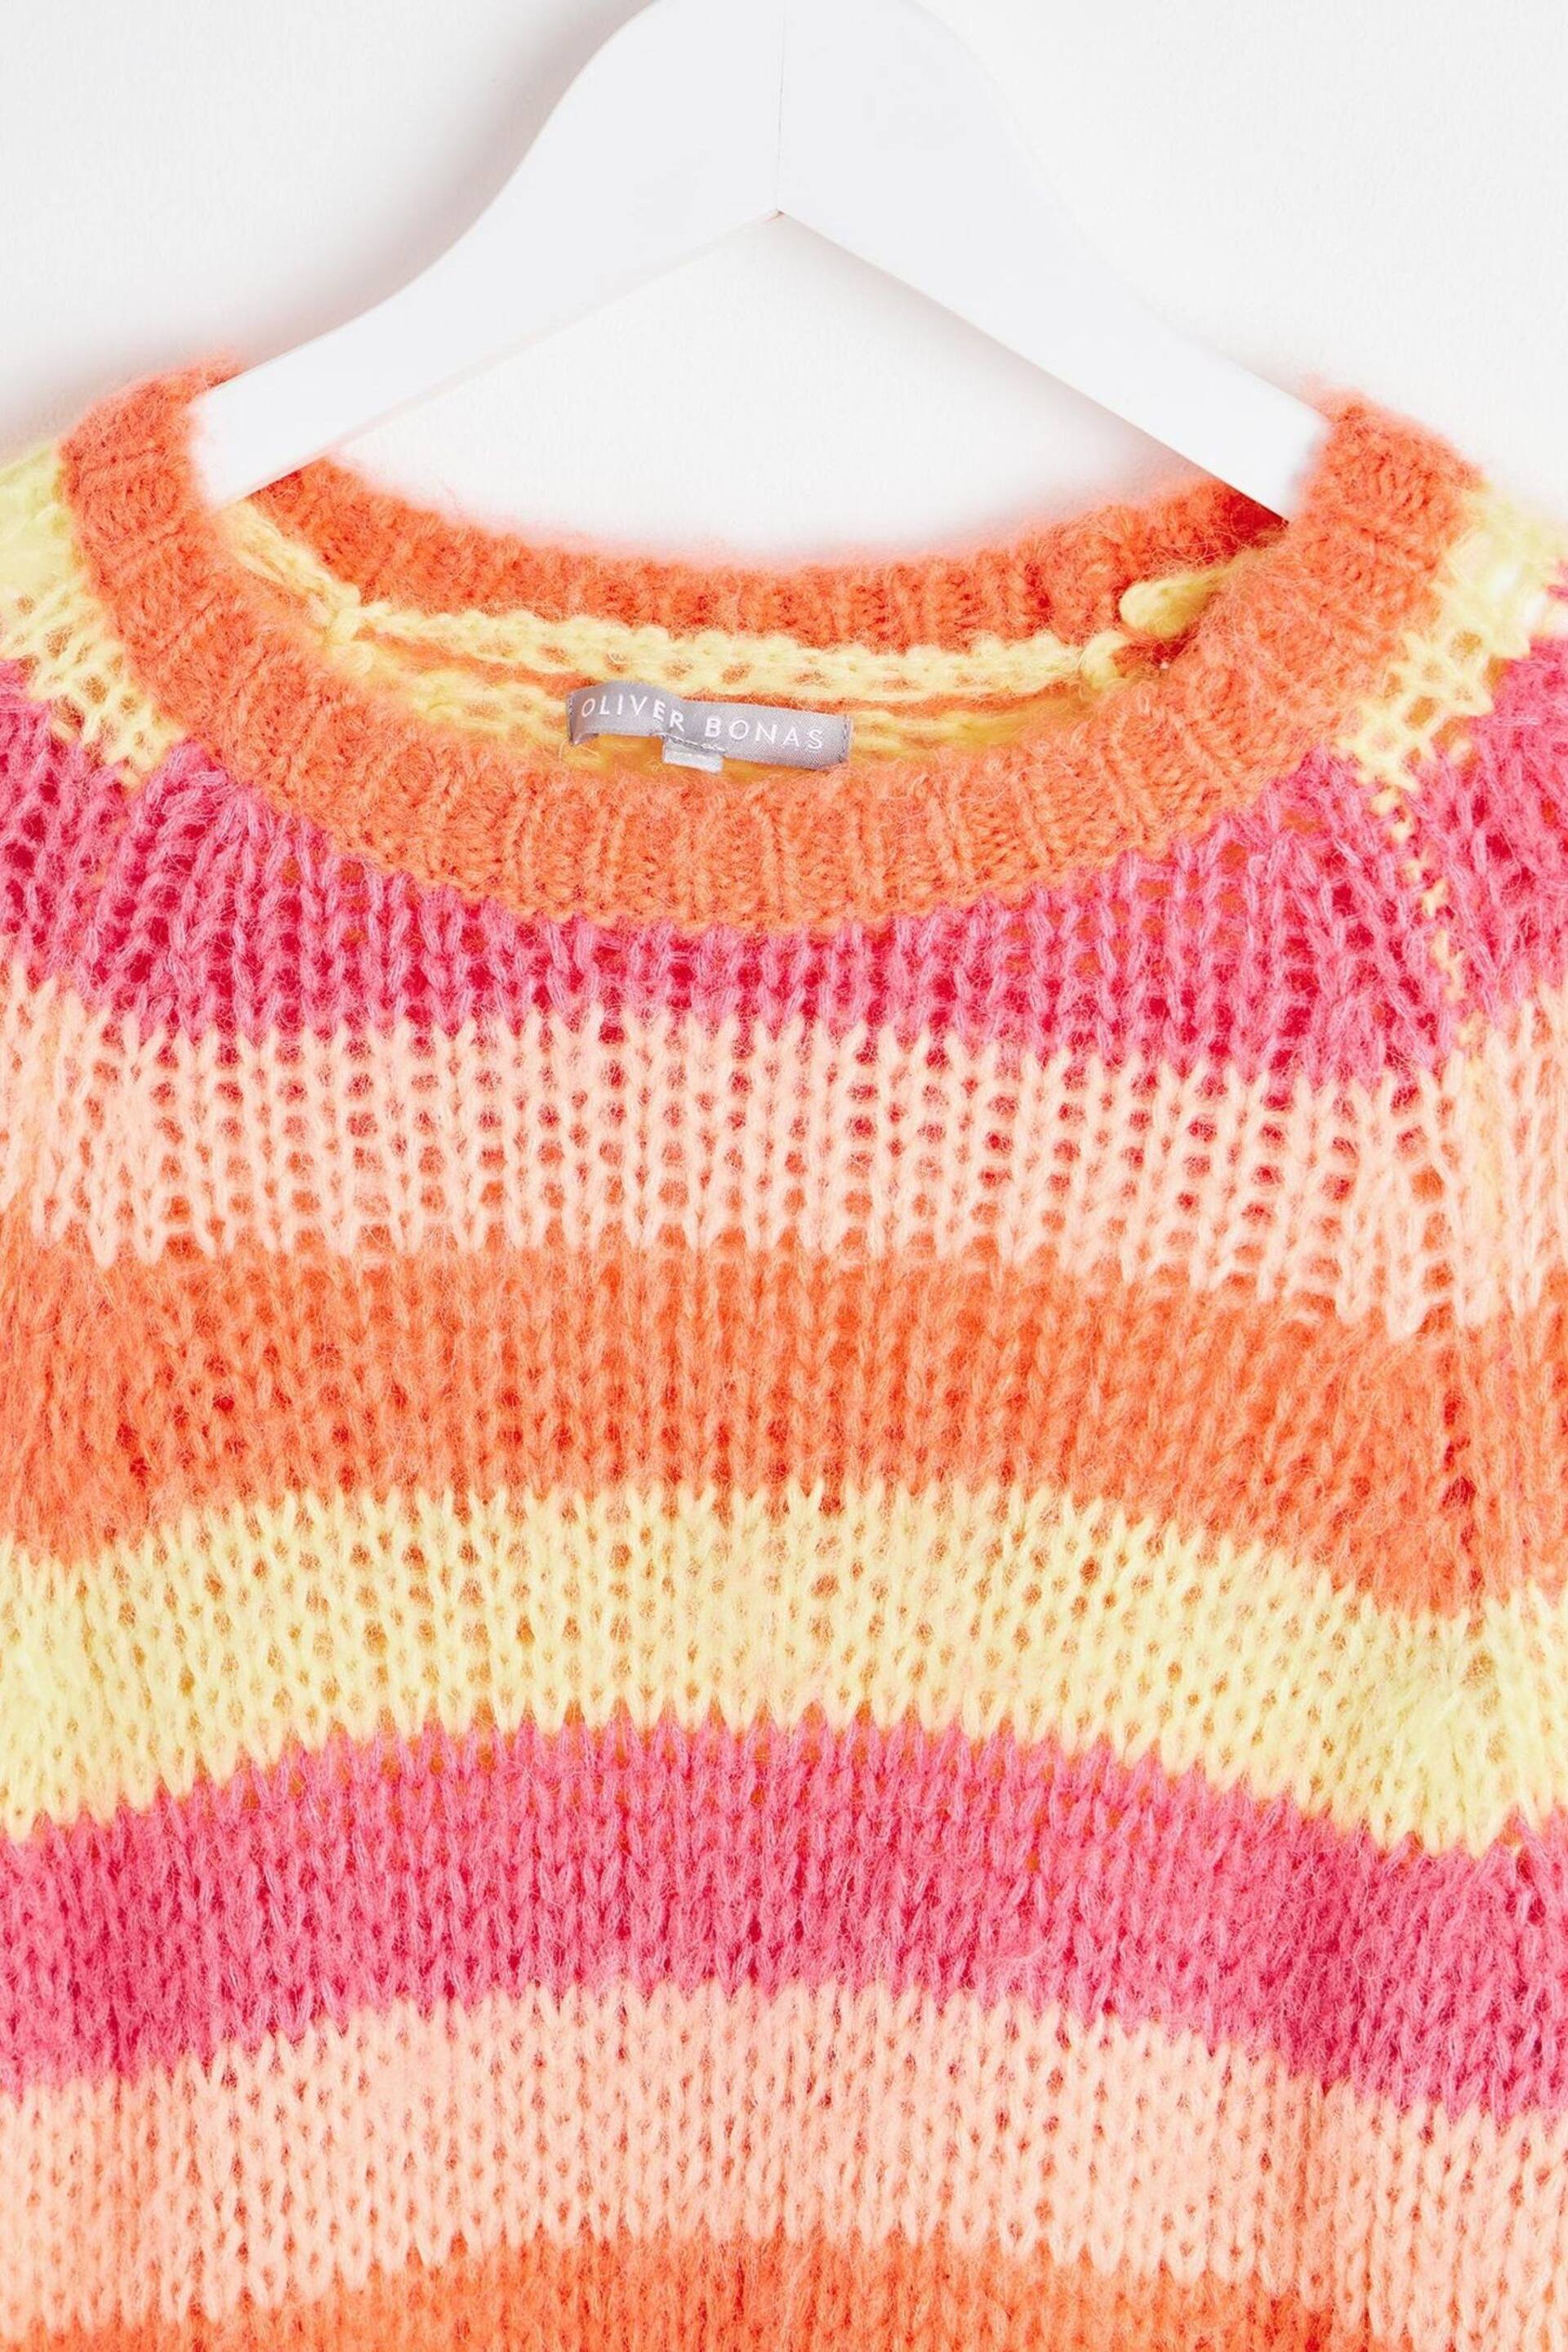 Oliver Bonas Multi Striped Lofty Knitted Jumper - Image 6 of 8